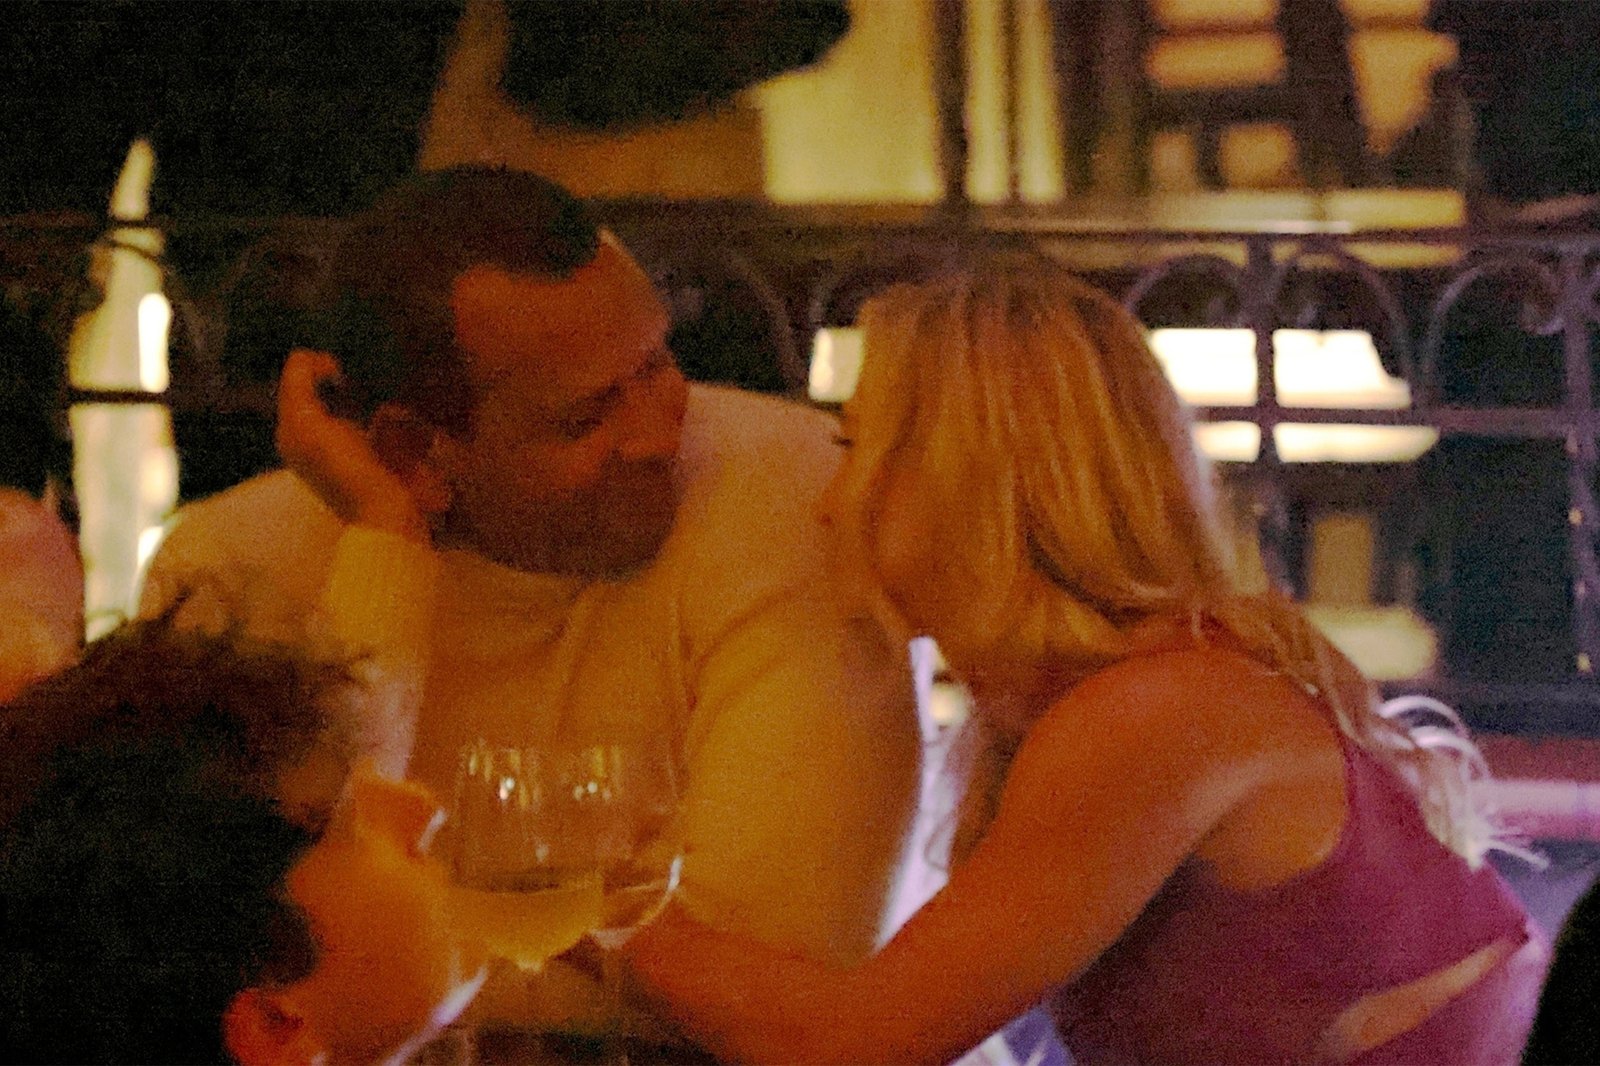 A-Rod and gal buddy Kathryne Padgett viewed kissing whereas partying in Italy